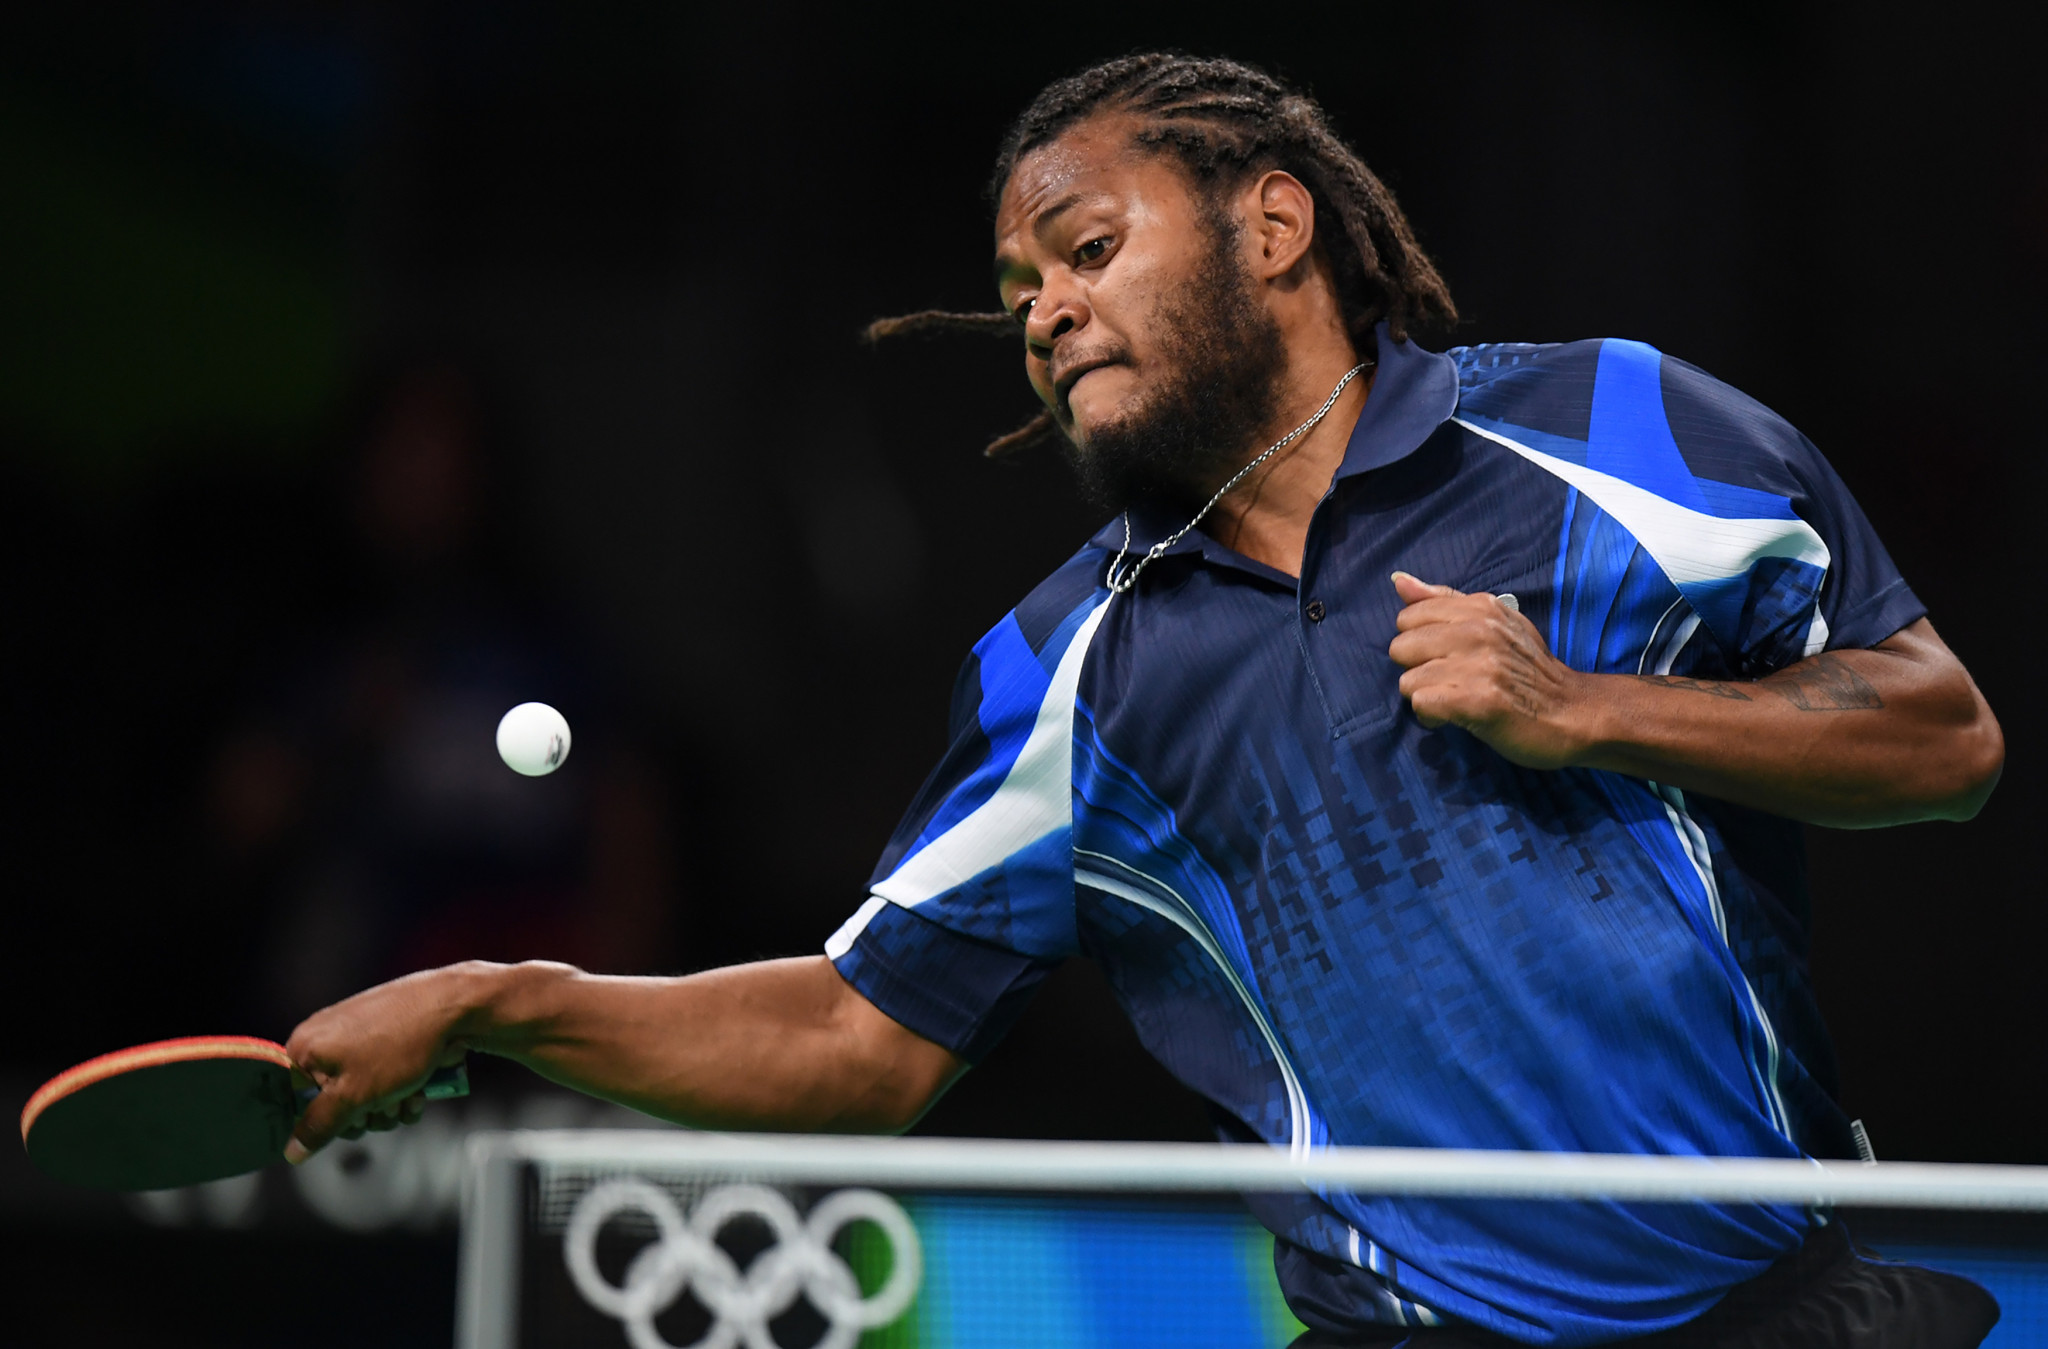 Vanuatu table tennis player Yoshua Shing is set to make his third consecutive appearance at the Olympic Games in Tokyo after having previously played at London 2012 and Rio 2016 ©Getty Images